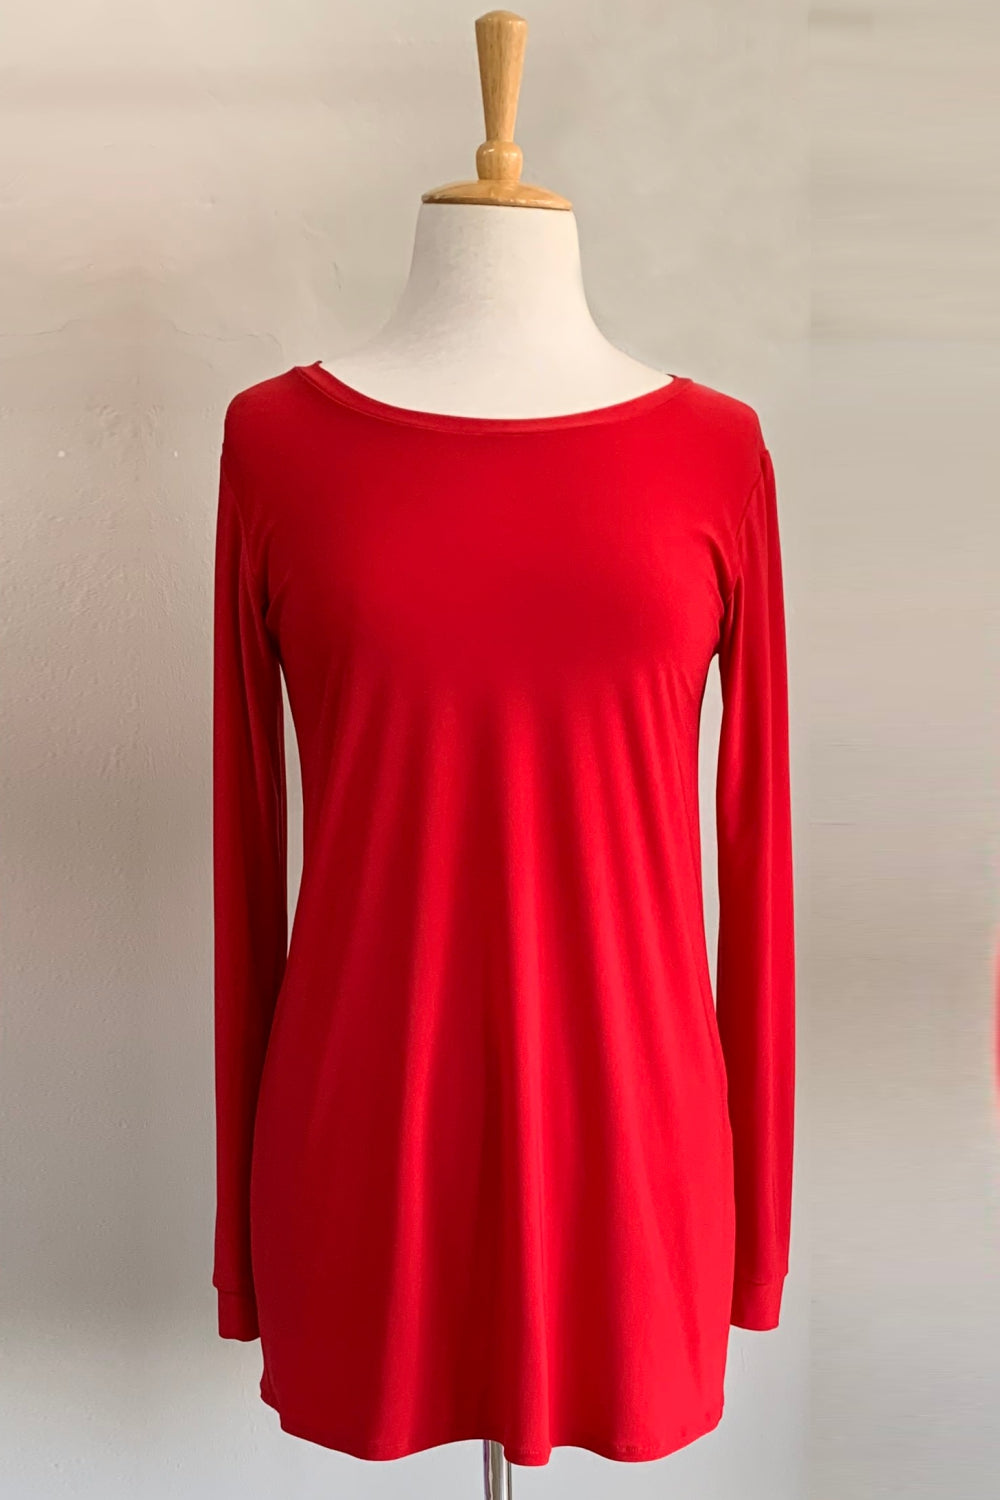 Basic Long-Sleeve Boatneck Top - Bright Red